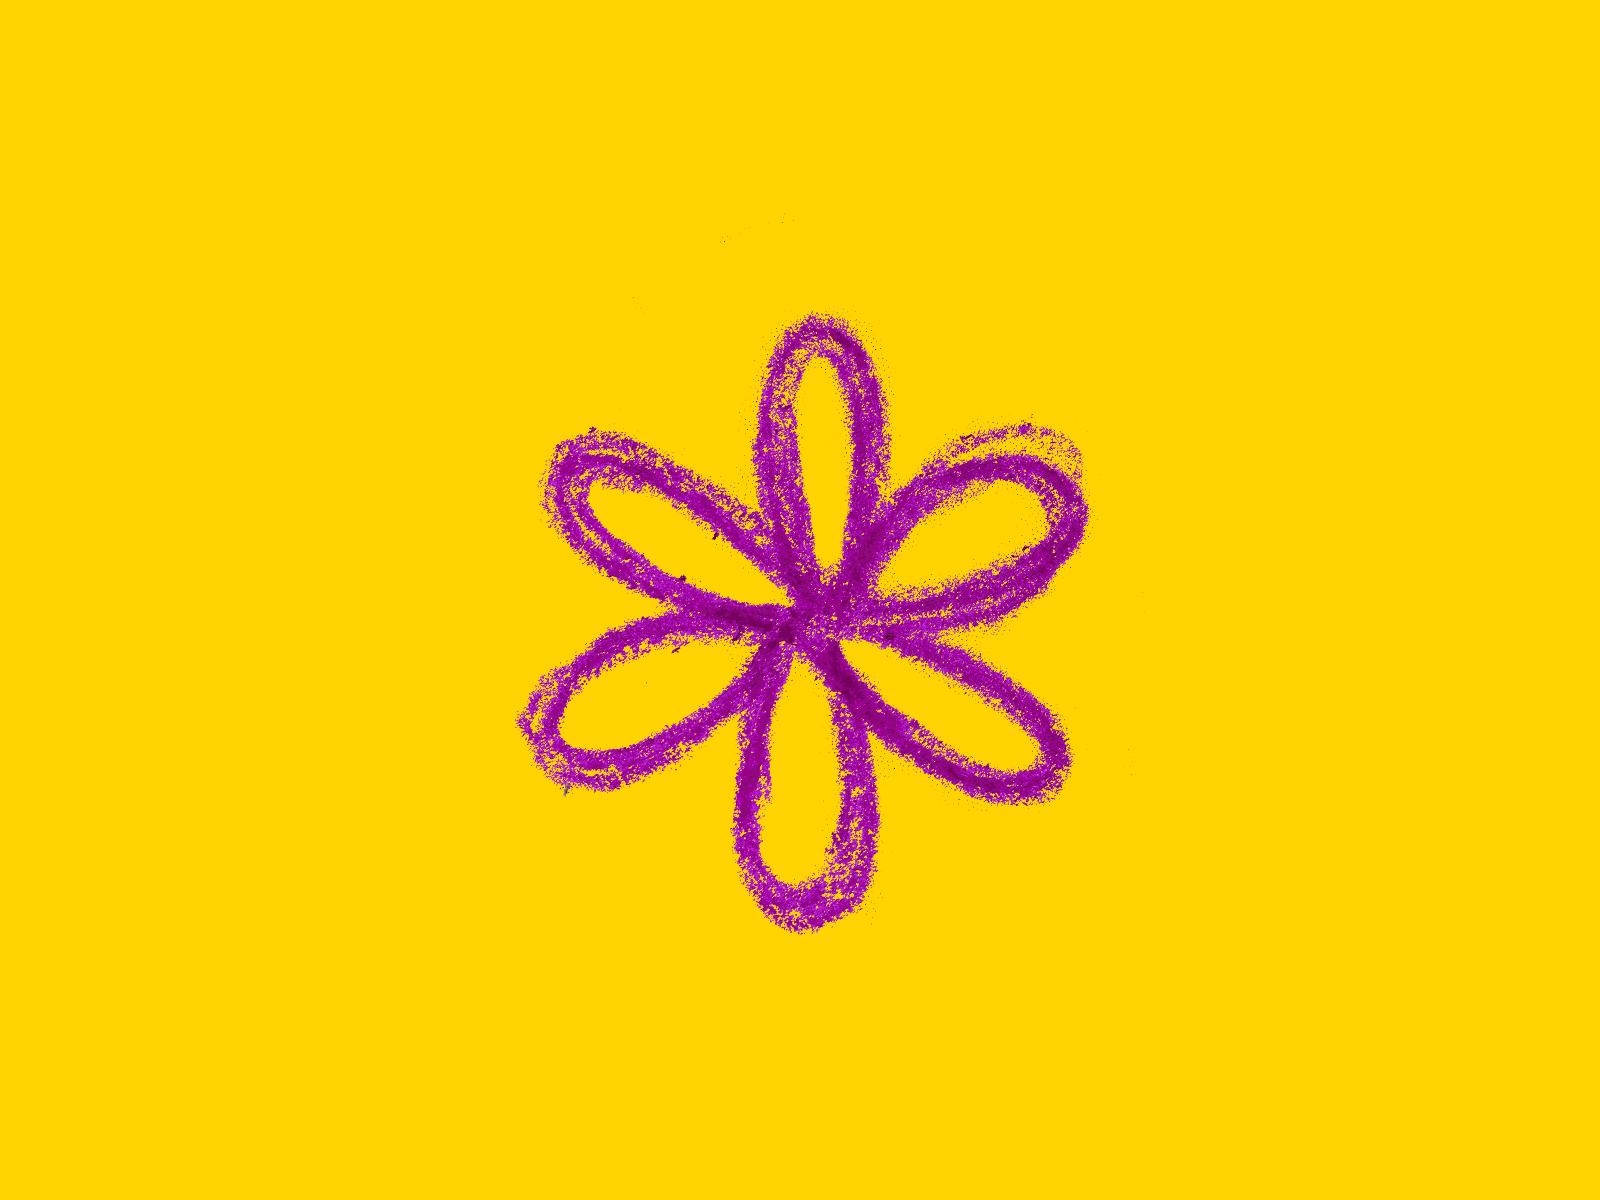 Crayola Flower animation circle crayola crayon flower frame by frame frame to frame gif illustration loading loop scan texture transformation transition